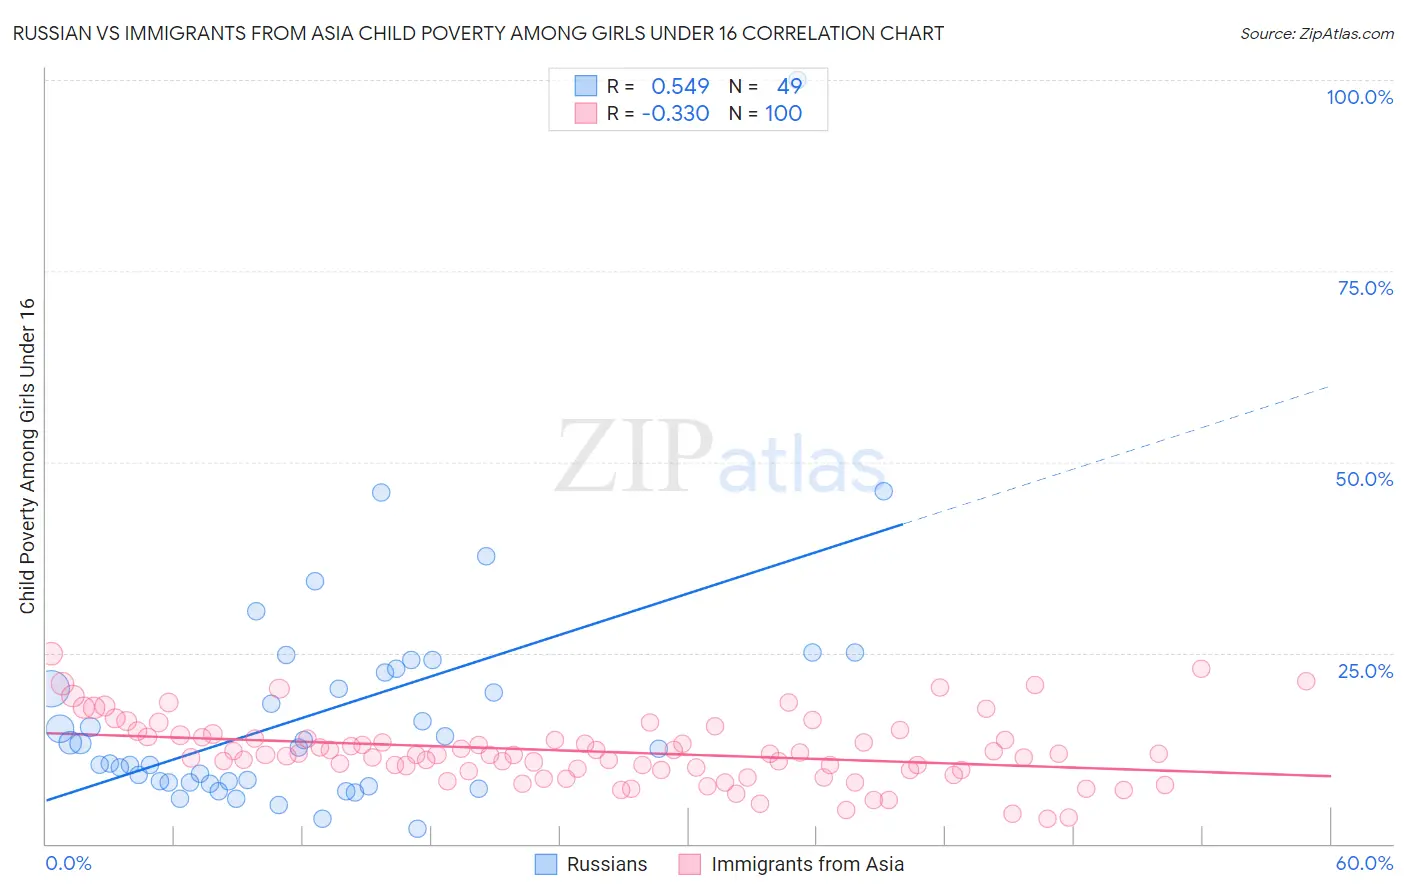 Russian vs Immigrants from Asia Child Poverty Among Girls Under 16